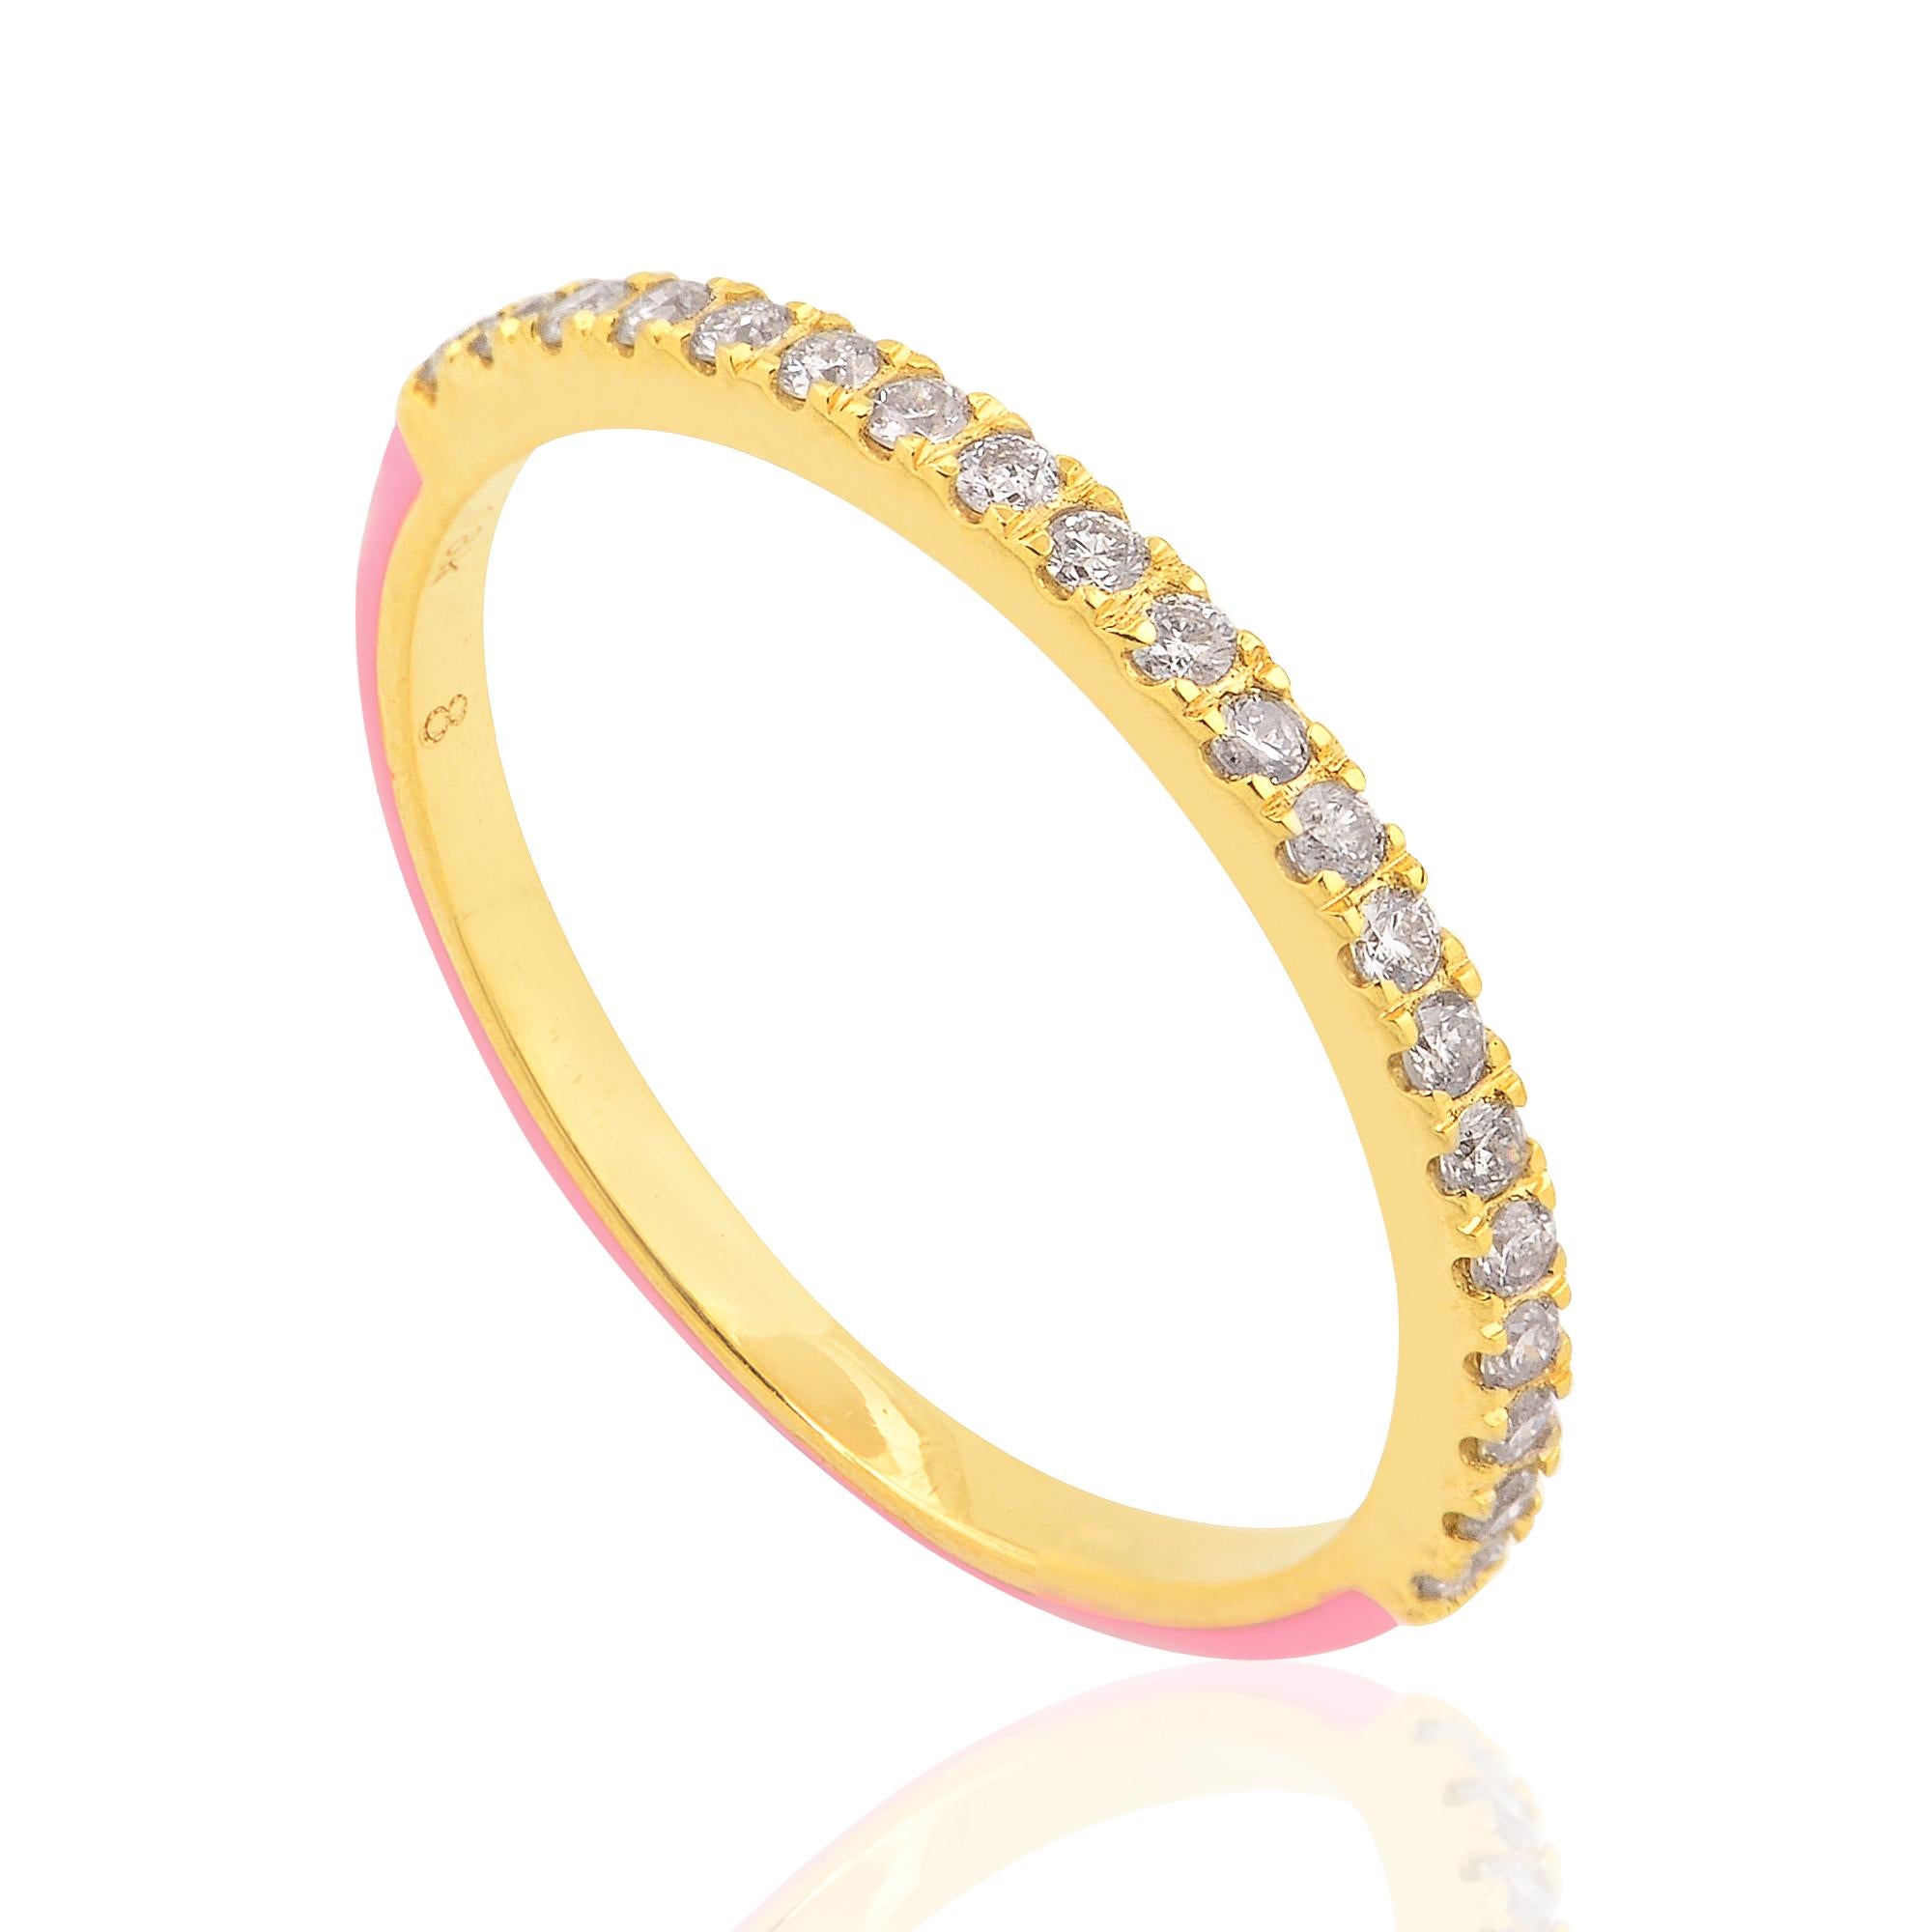 For Sale:  0.22 Carat Diamond Pave Half Band Ring Solid 18k Yellow Gold Enamel Fine Jewelry 3